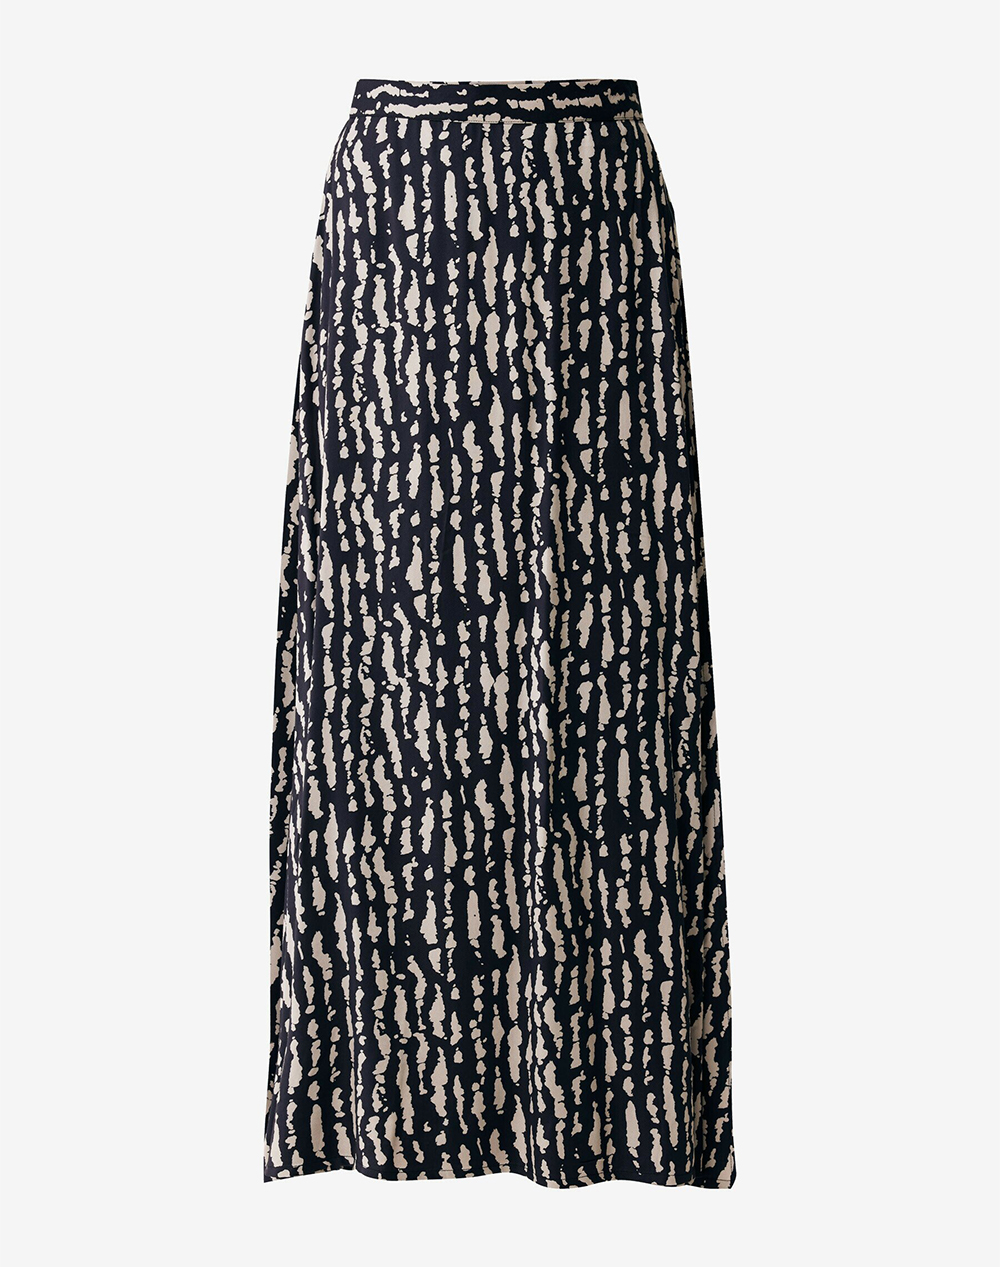 MEXX All over printed skirt